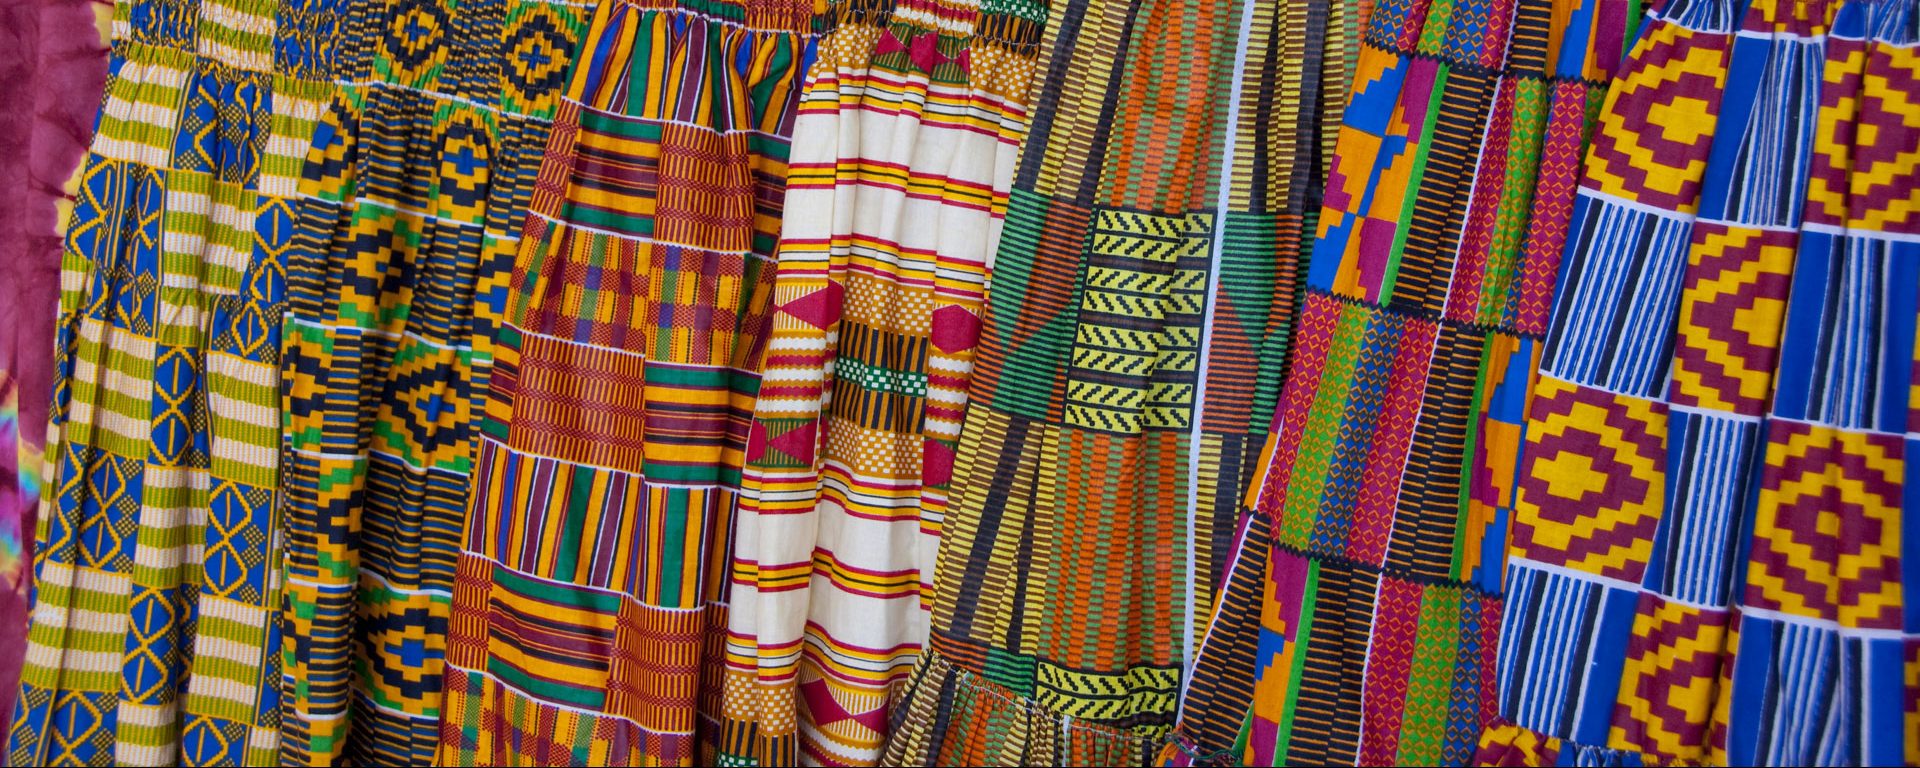 Colorful textiles in market in Accra, Ghana